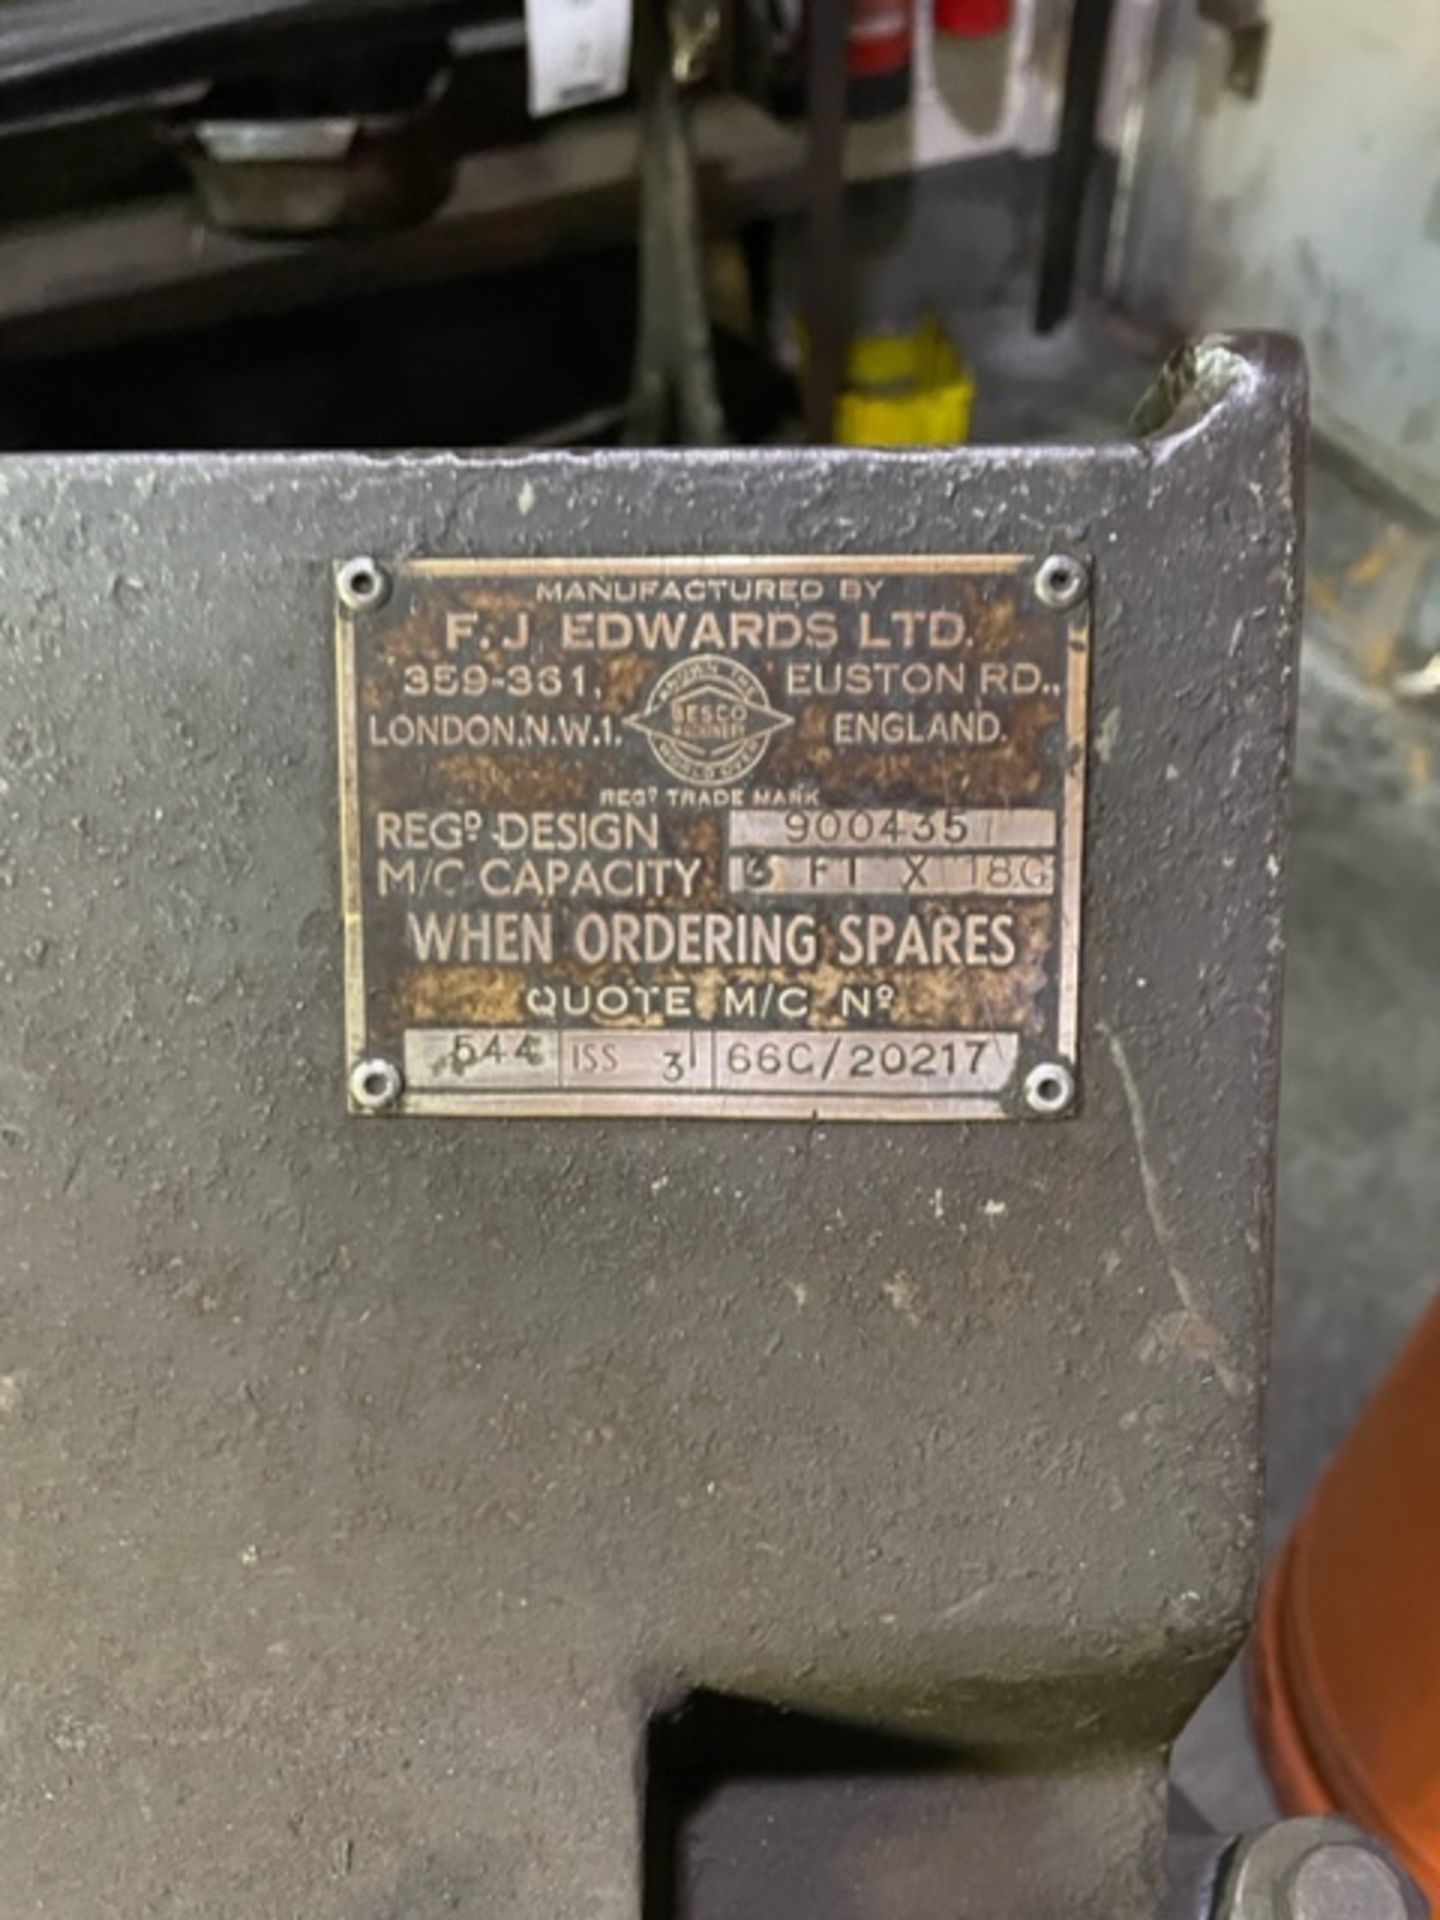 F.J. Edwards 900435 3’x18G Manual Folder, Serial Number 3668c/20217 (Location Colchester. Please - Image 2 of 2